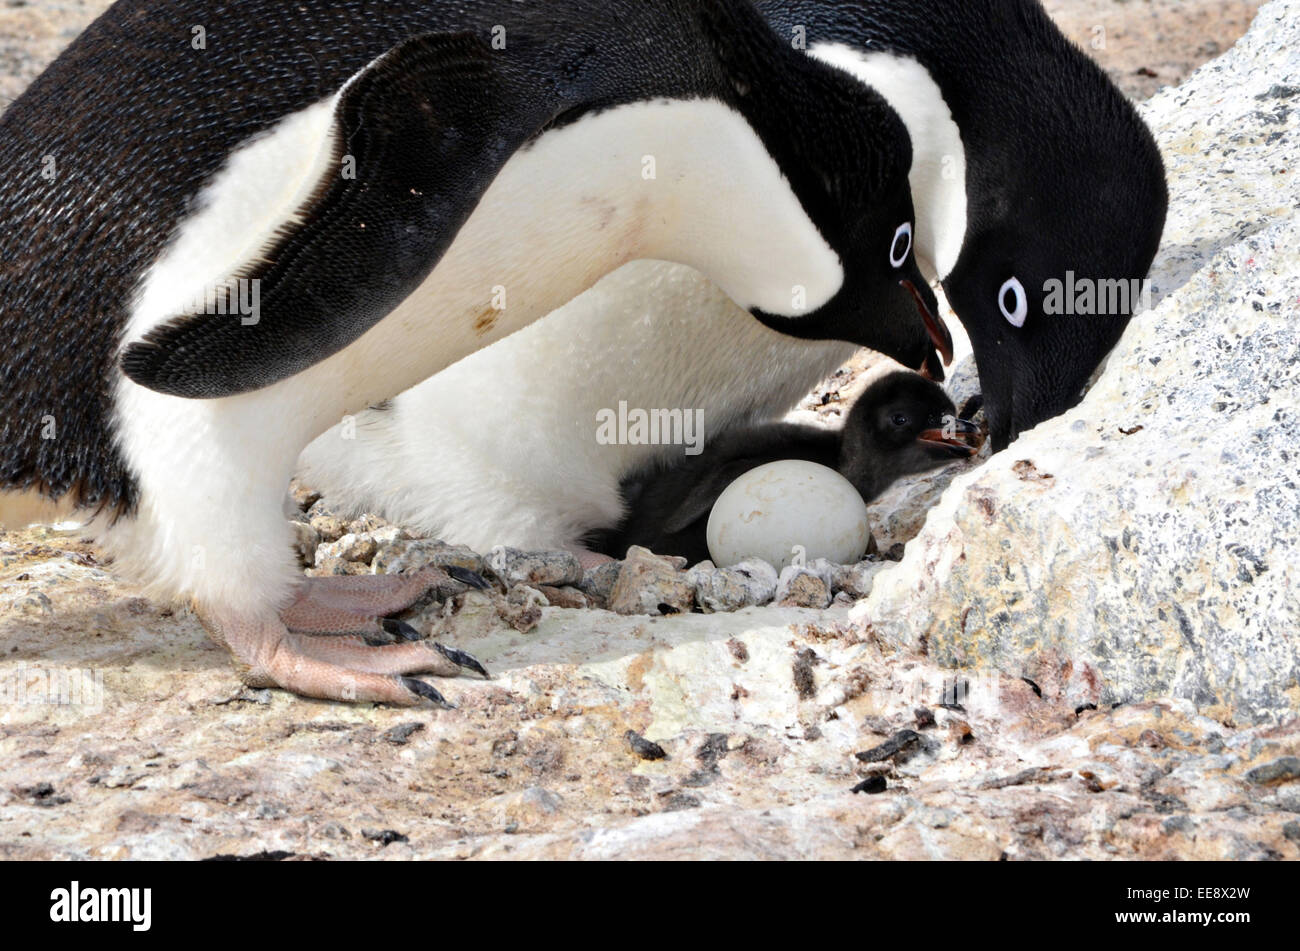 Two Adelie penguins protect a chick and egg at Cape Royds, which is the southernmost breeding grounds in the world for Antarctica's iconic seabird. Fewer than 2,000 breeding pairs return to the colony each year during the summer to lay eggs and raise chicks. Stock Photo